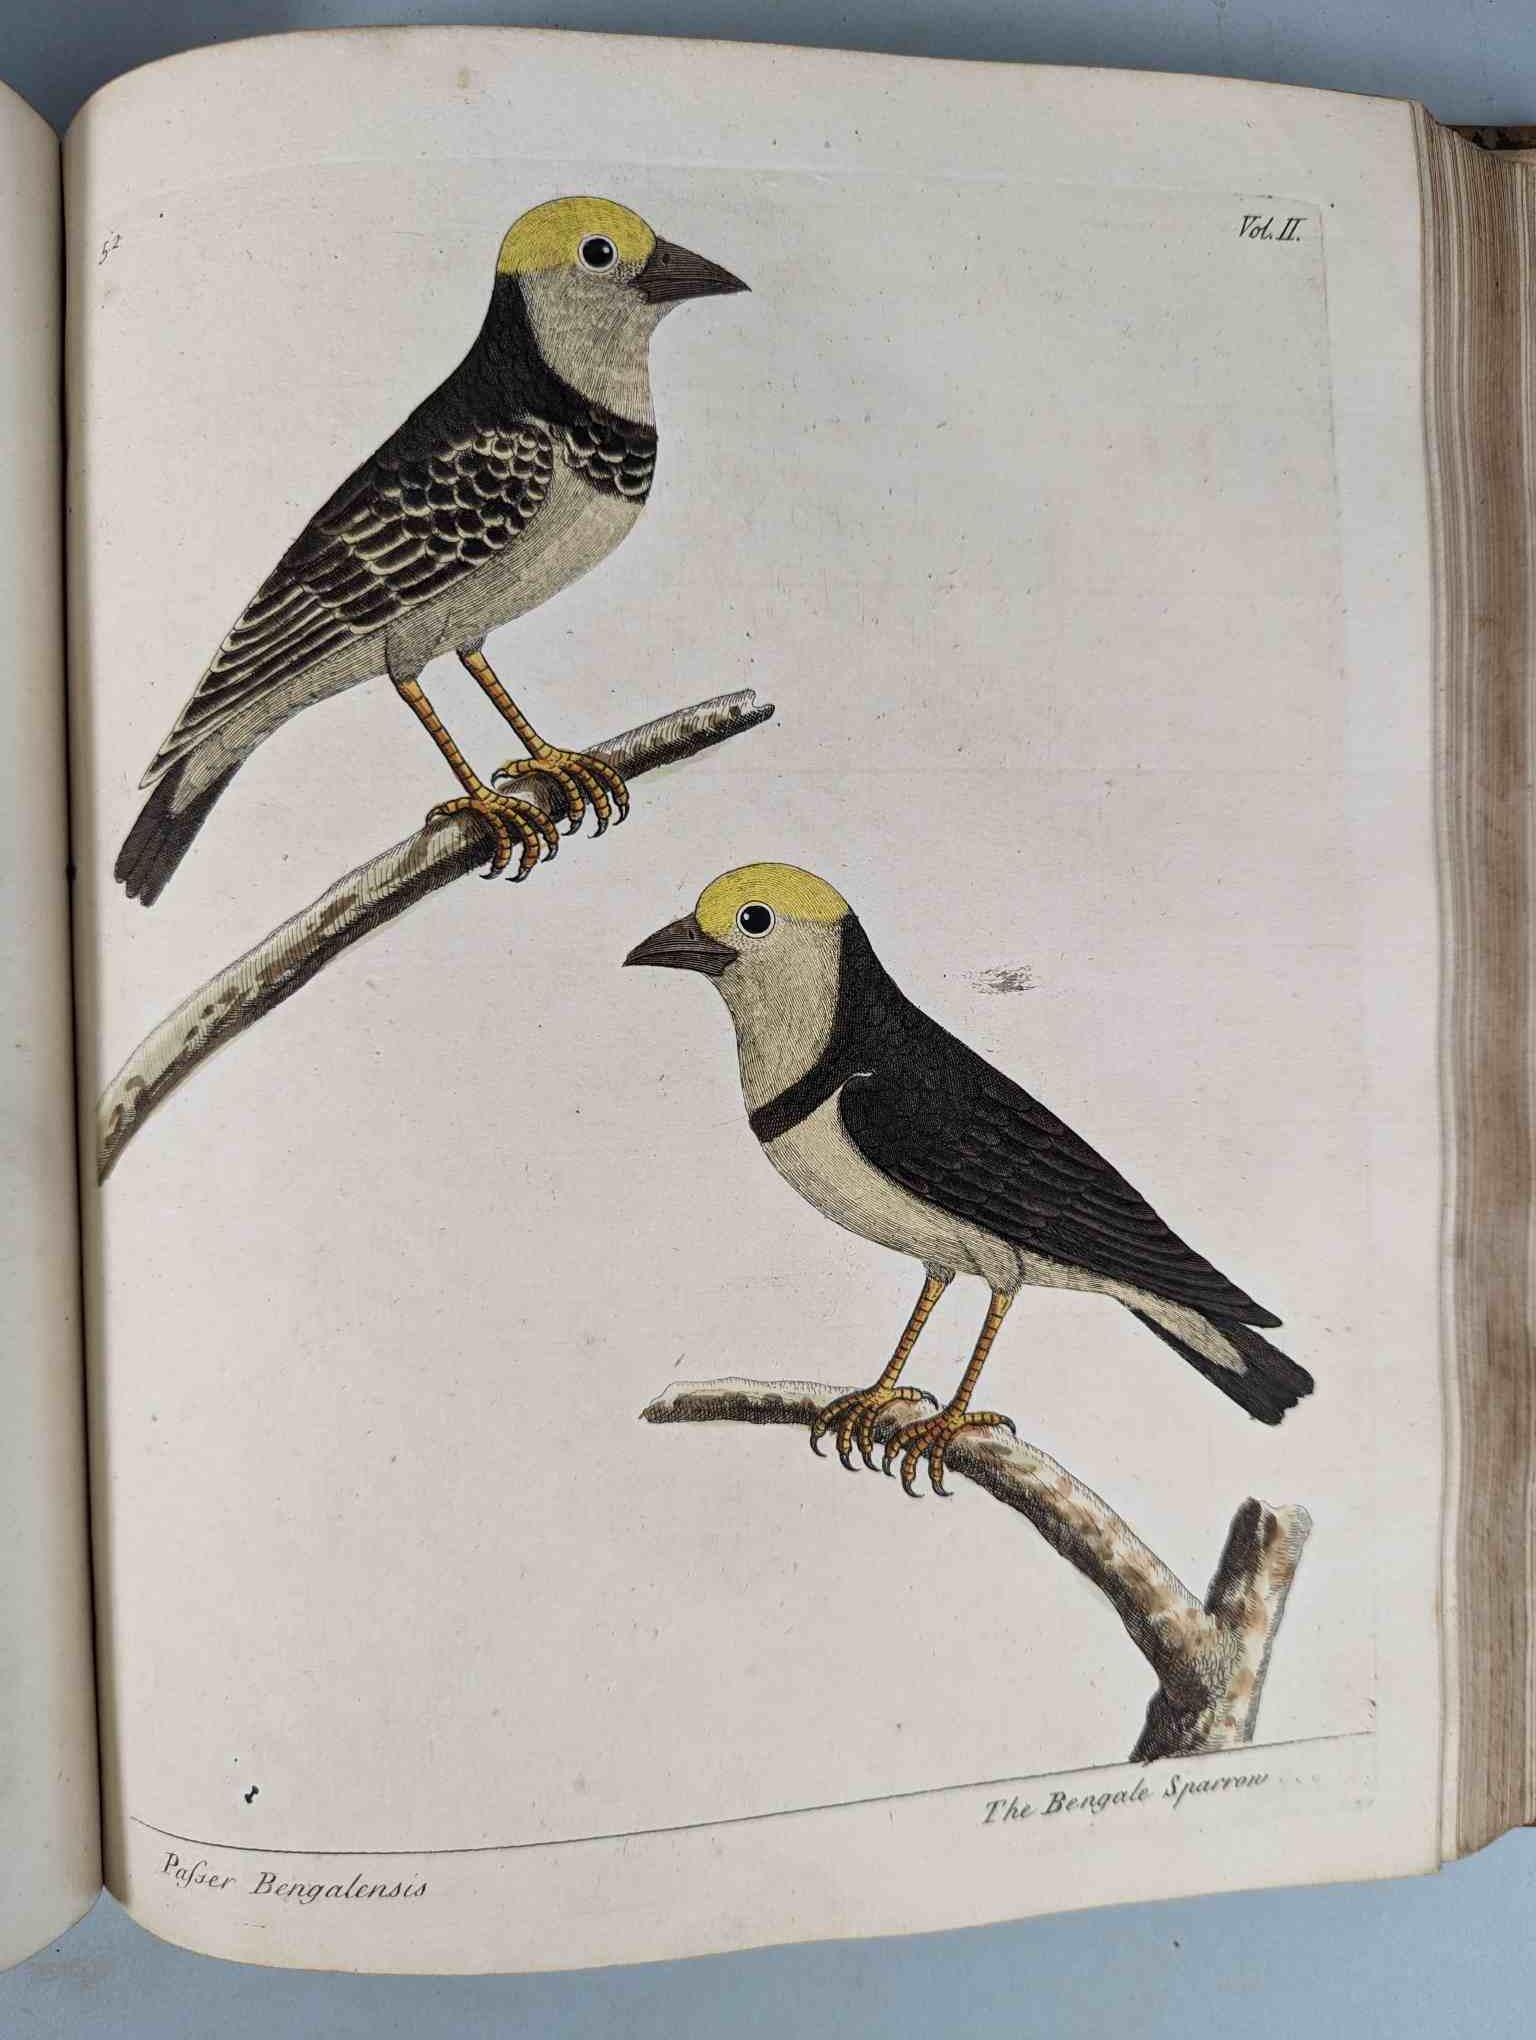 ALBIN, Eleazar. A Natural History of Birds, to which are added, Notes and Observations by W. - Image 156 of 208